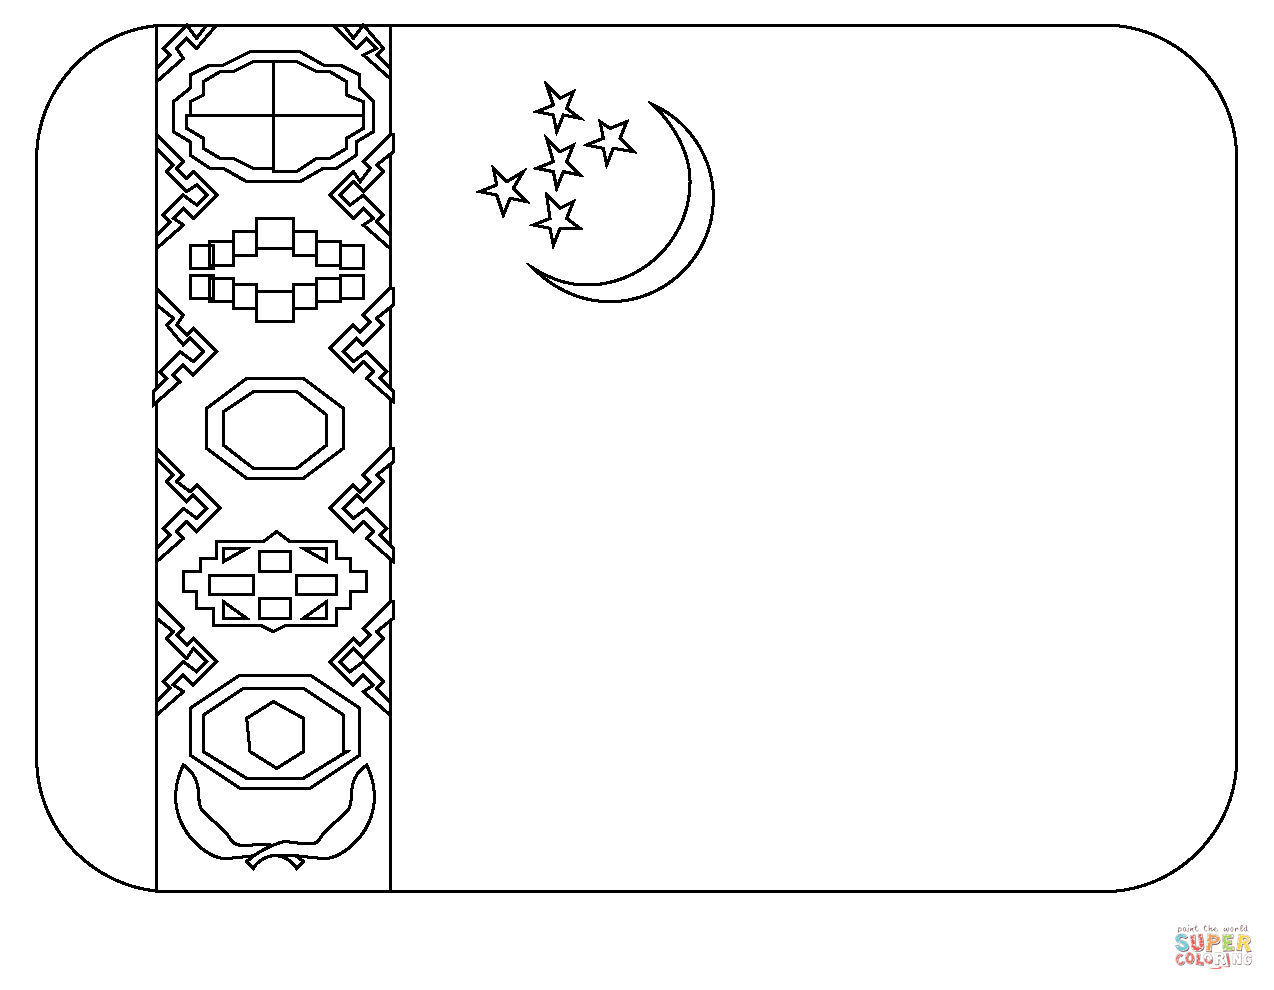 Flag of turkmenistan emoji coloring page free printable coloring pages